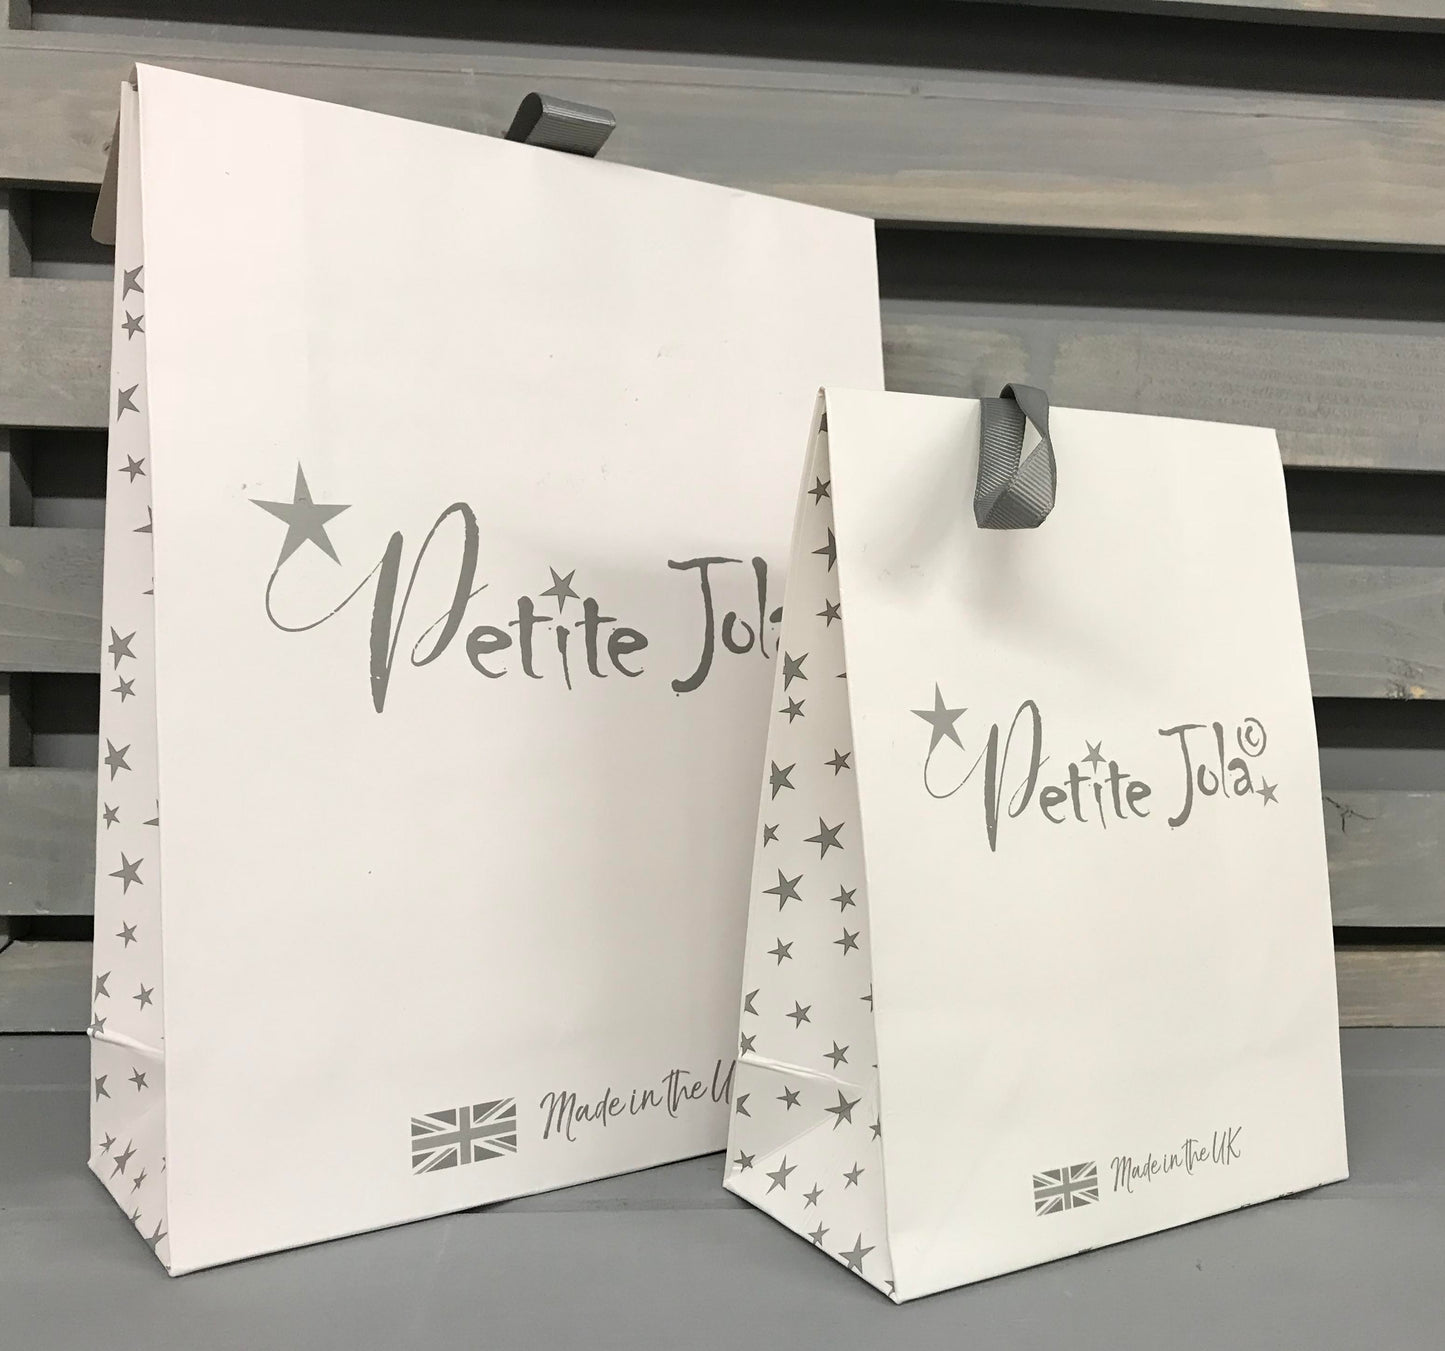 Petite Jola Gift bag Free with every baby wear purchase